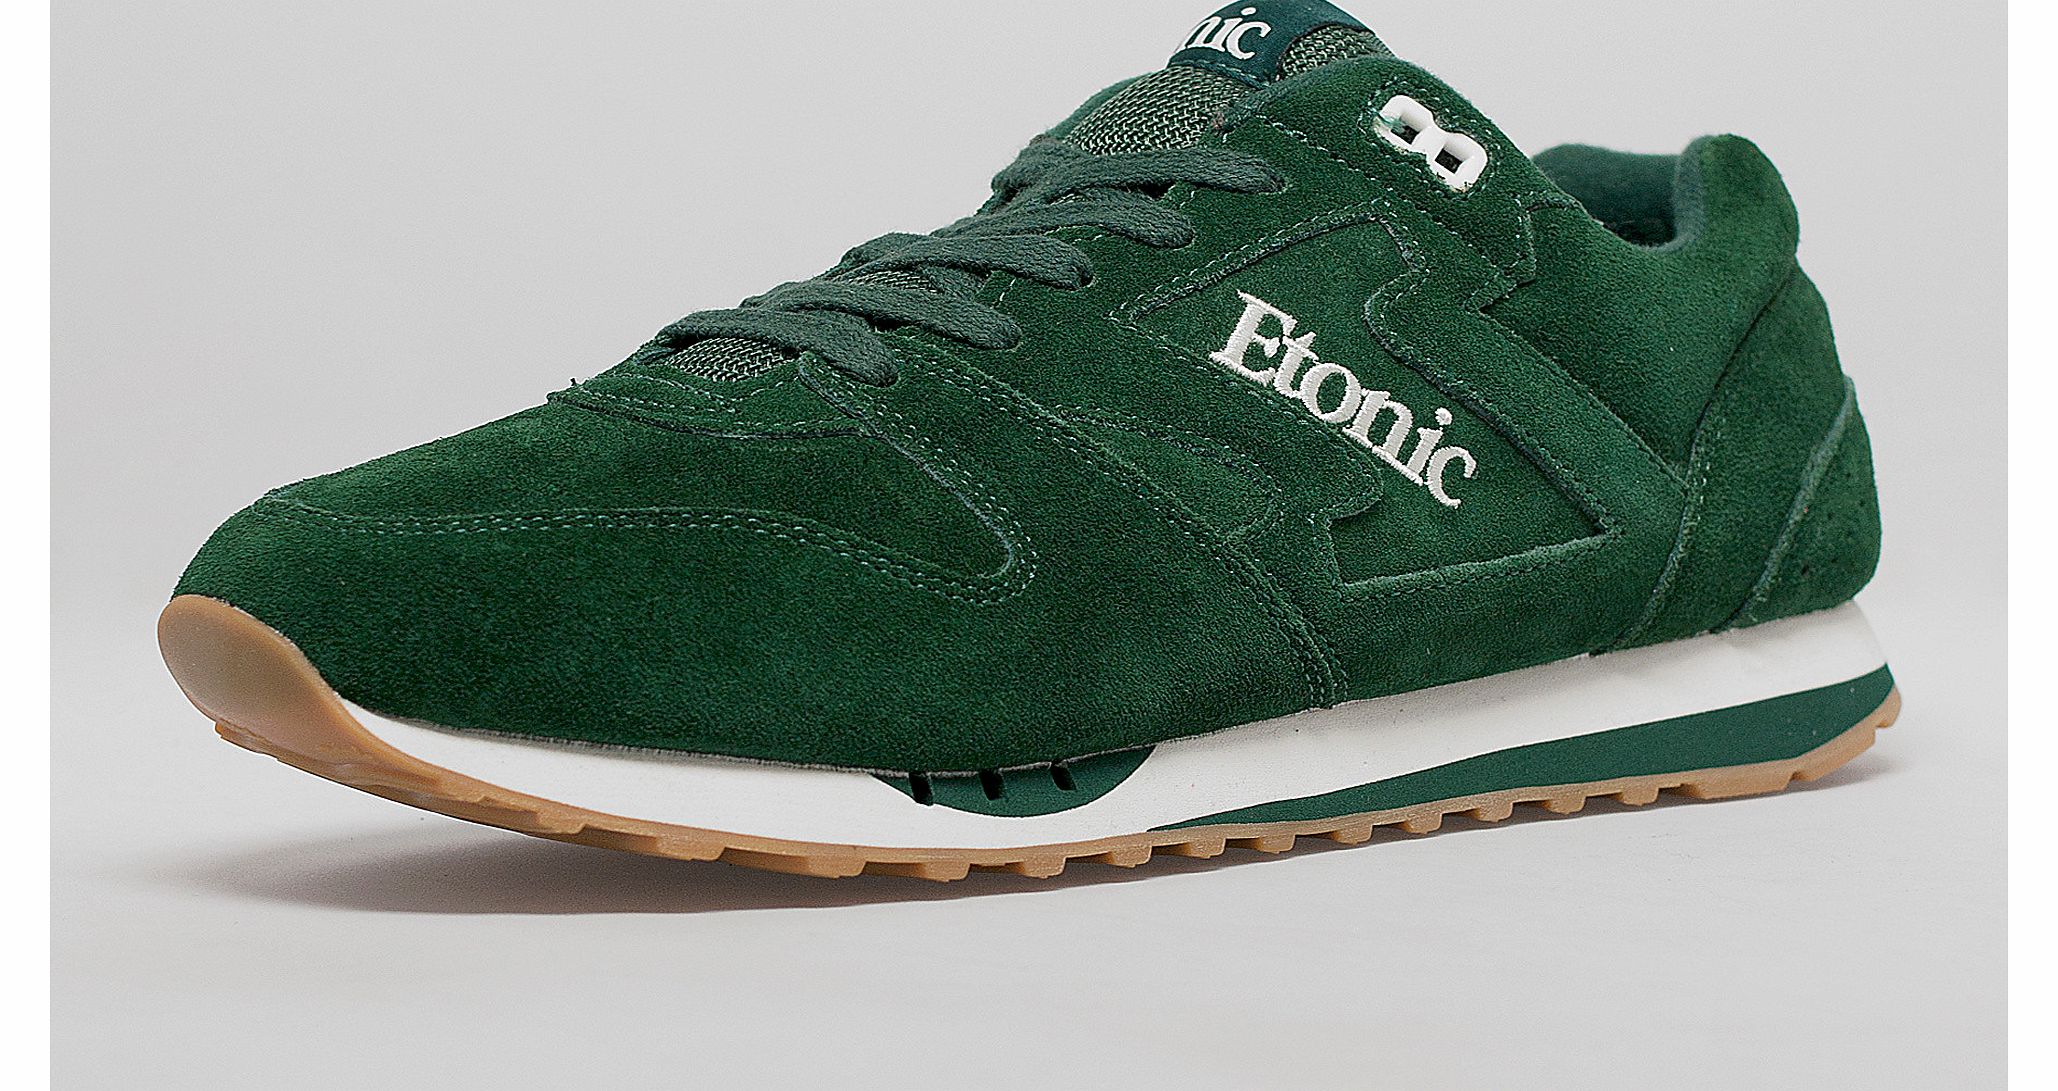 Etonic Trans AM Suede Collection